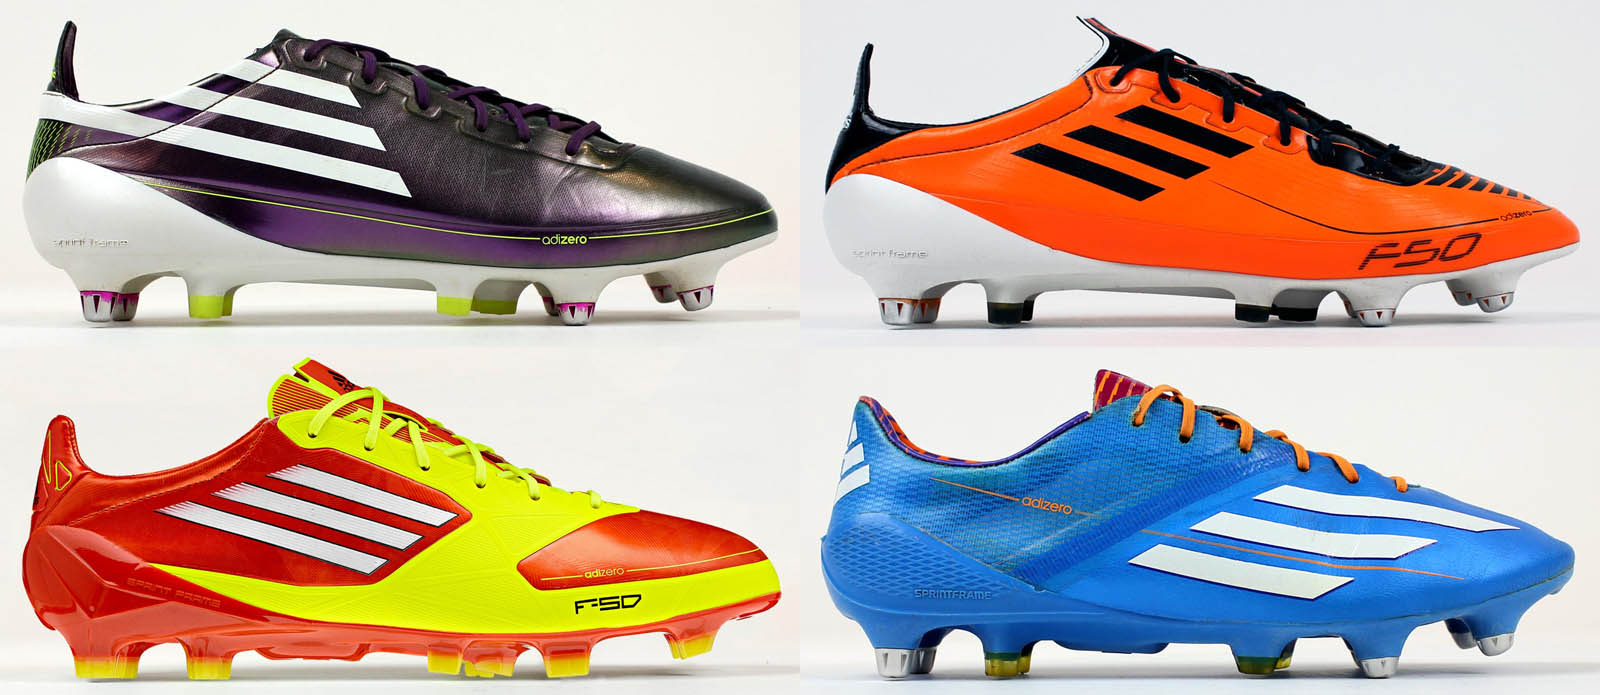 Exclusive: Adidas to Release F50 Ghosted Adizero 'Legends' Boots - Adipure & Predator Pulse Leaked -